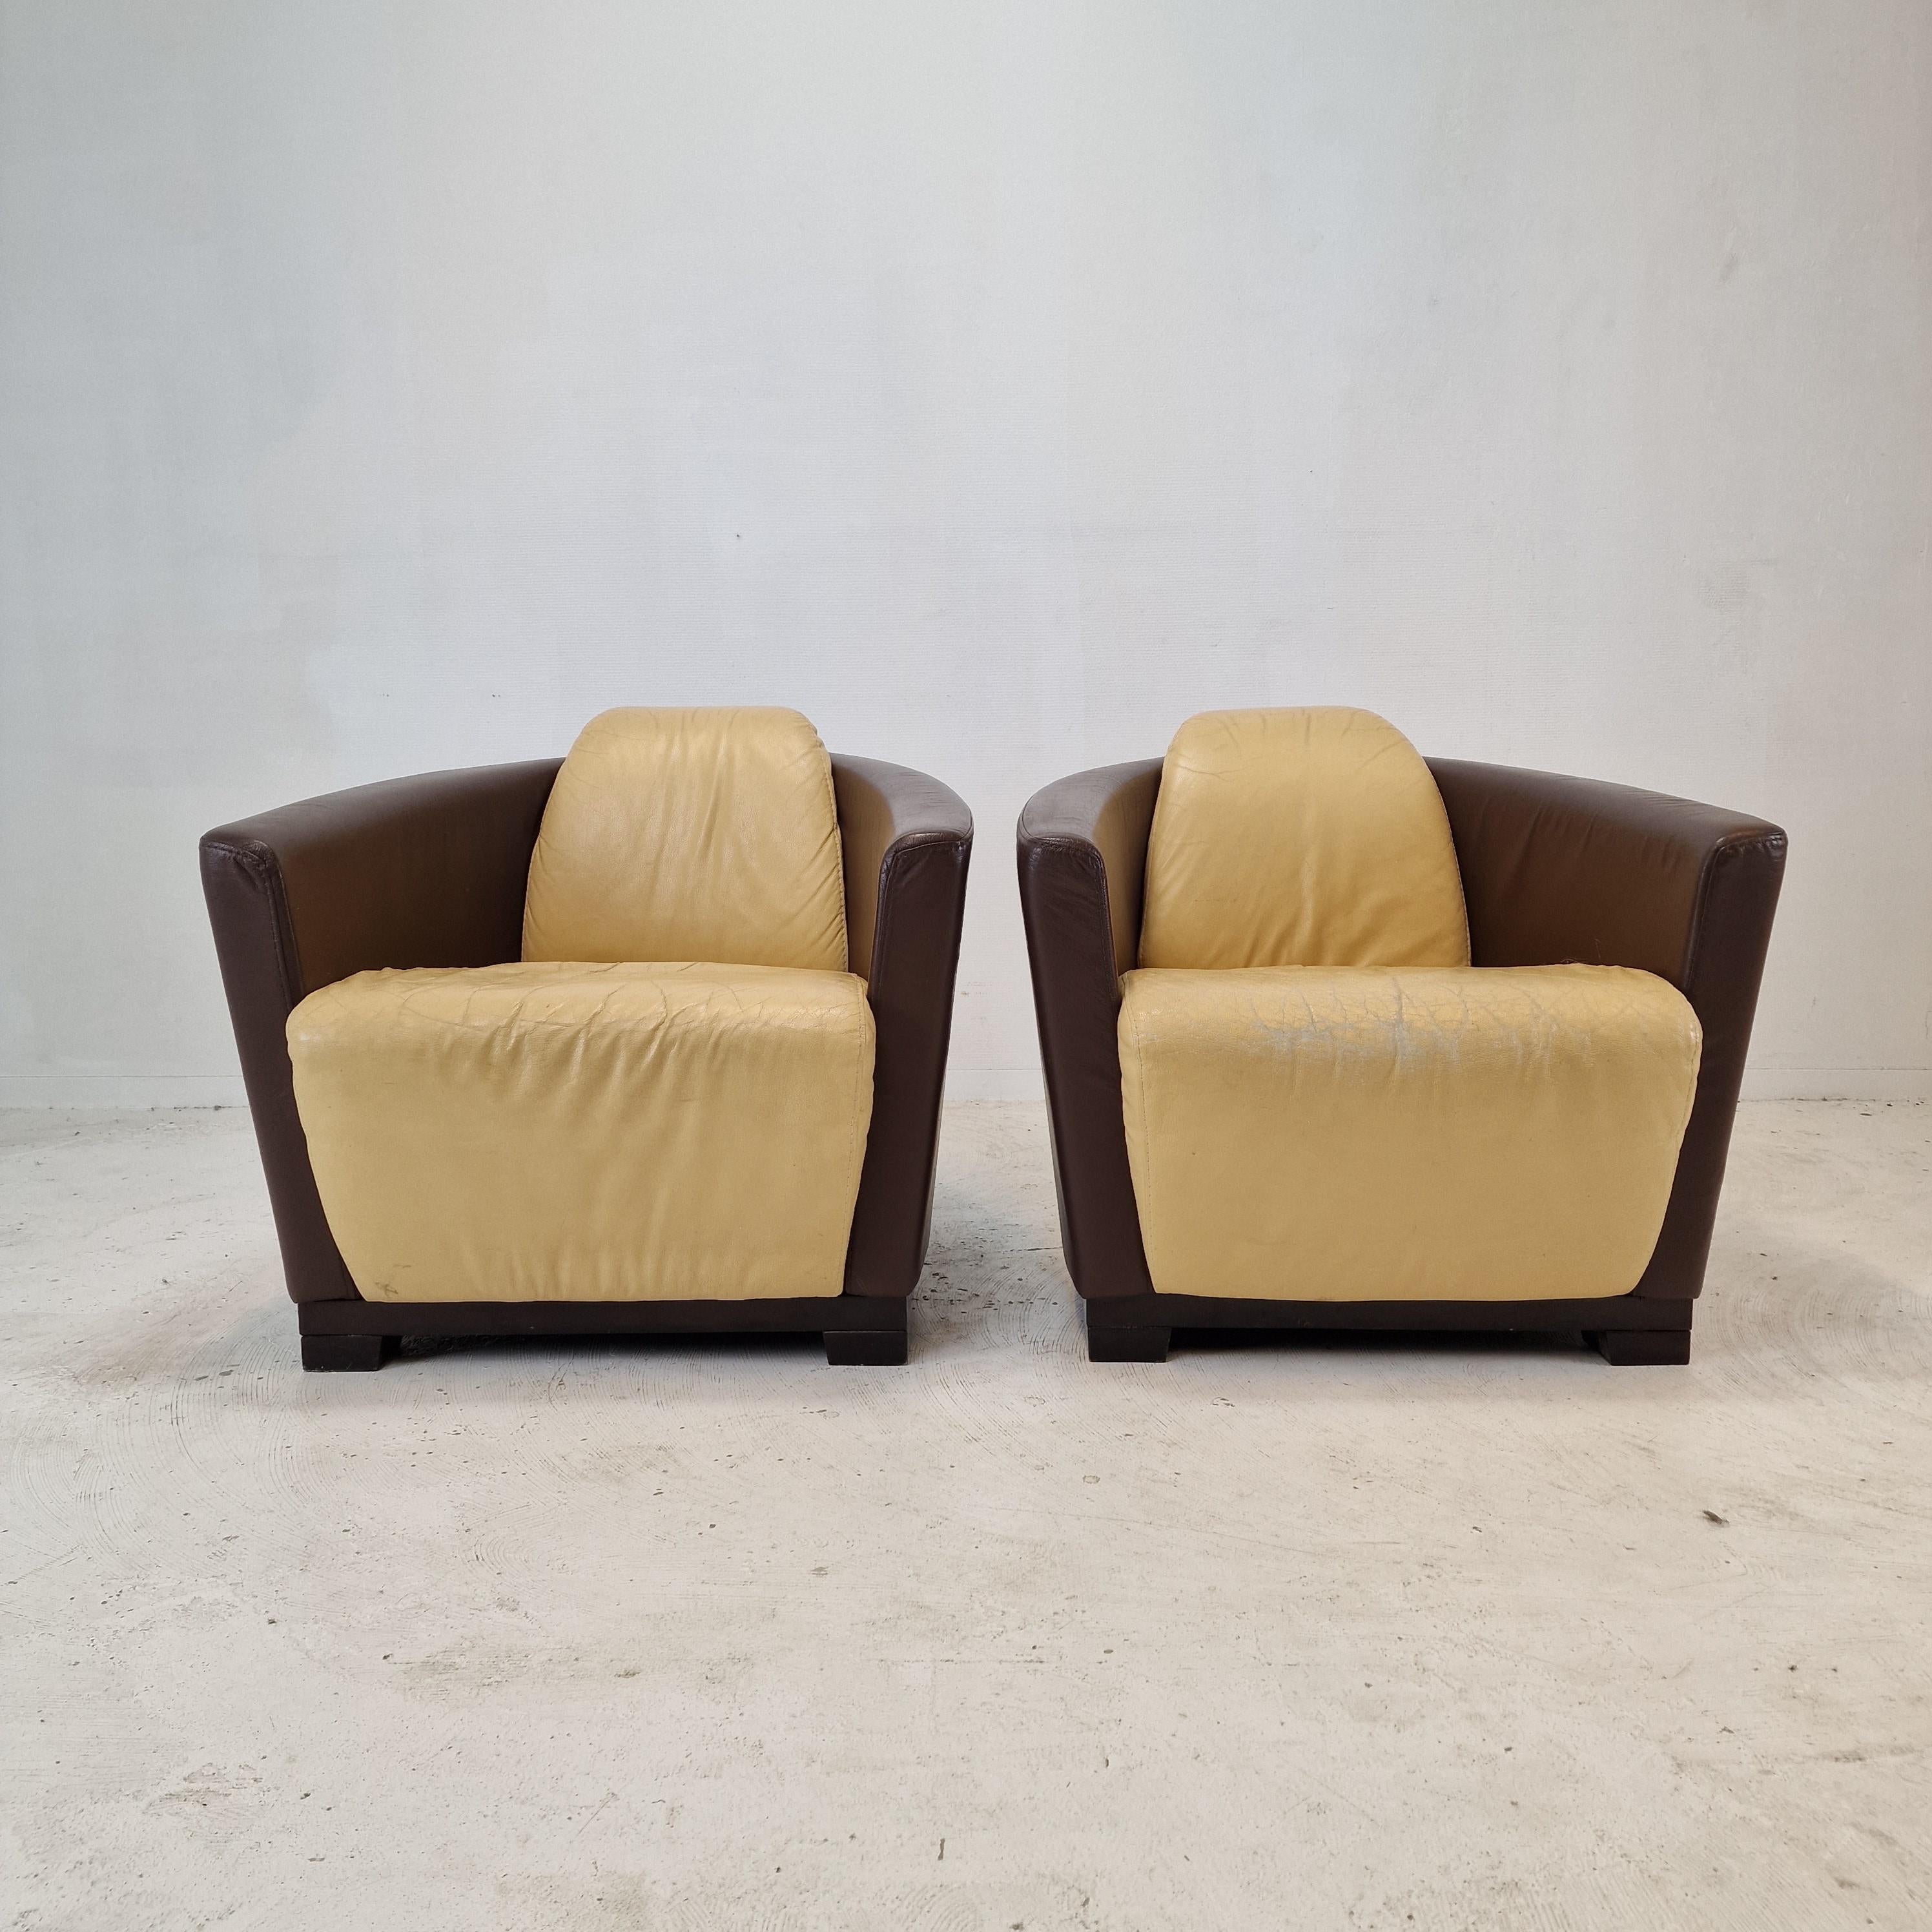 Very nice set of 2 Club or Lounge chairs, fabricated by Calia in Italy in the 80's. 

Created with a solid wooden frame and very nice beige and brown leather.
The high quality leather is in used condition has a lovely patina (see the pictures).

It